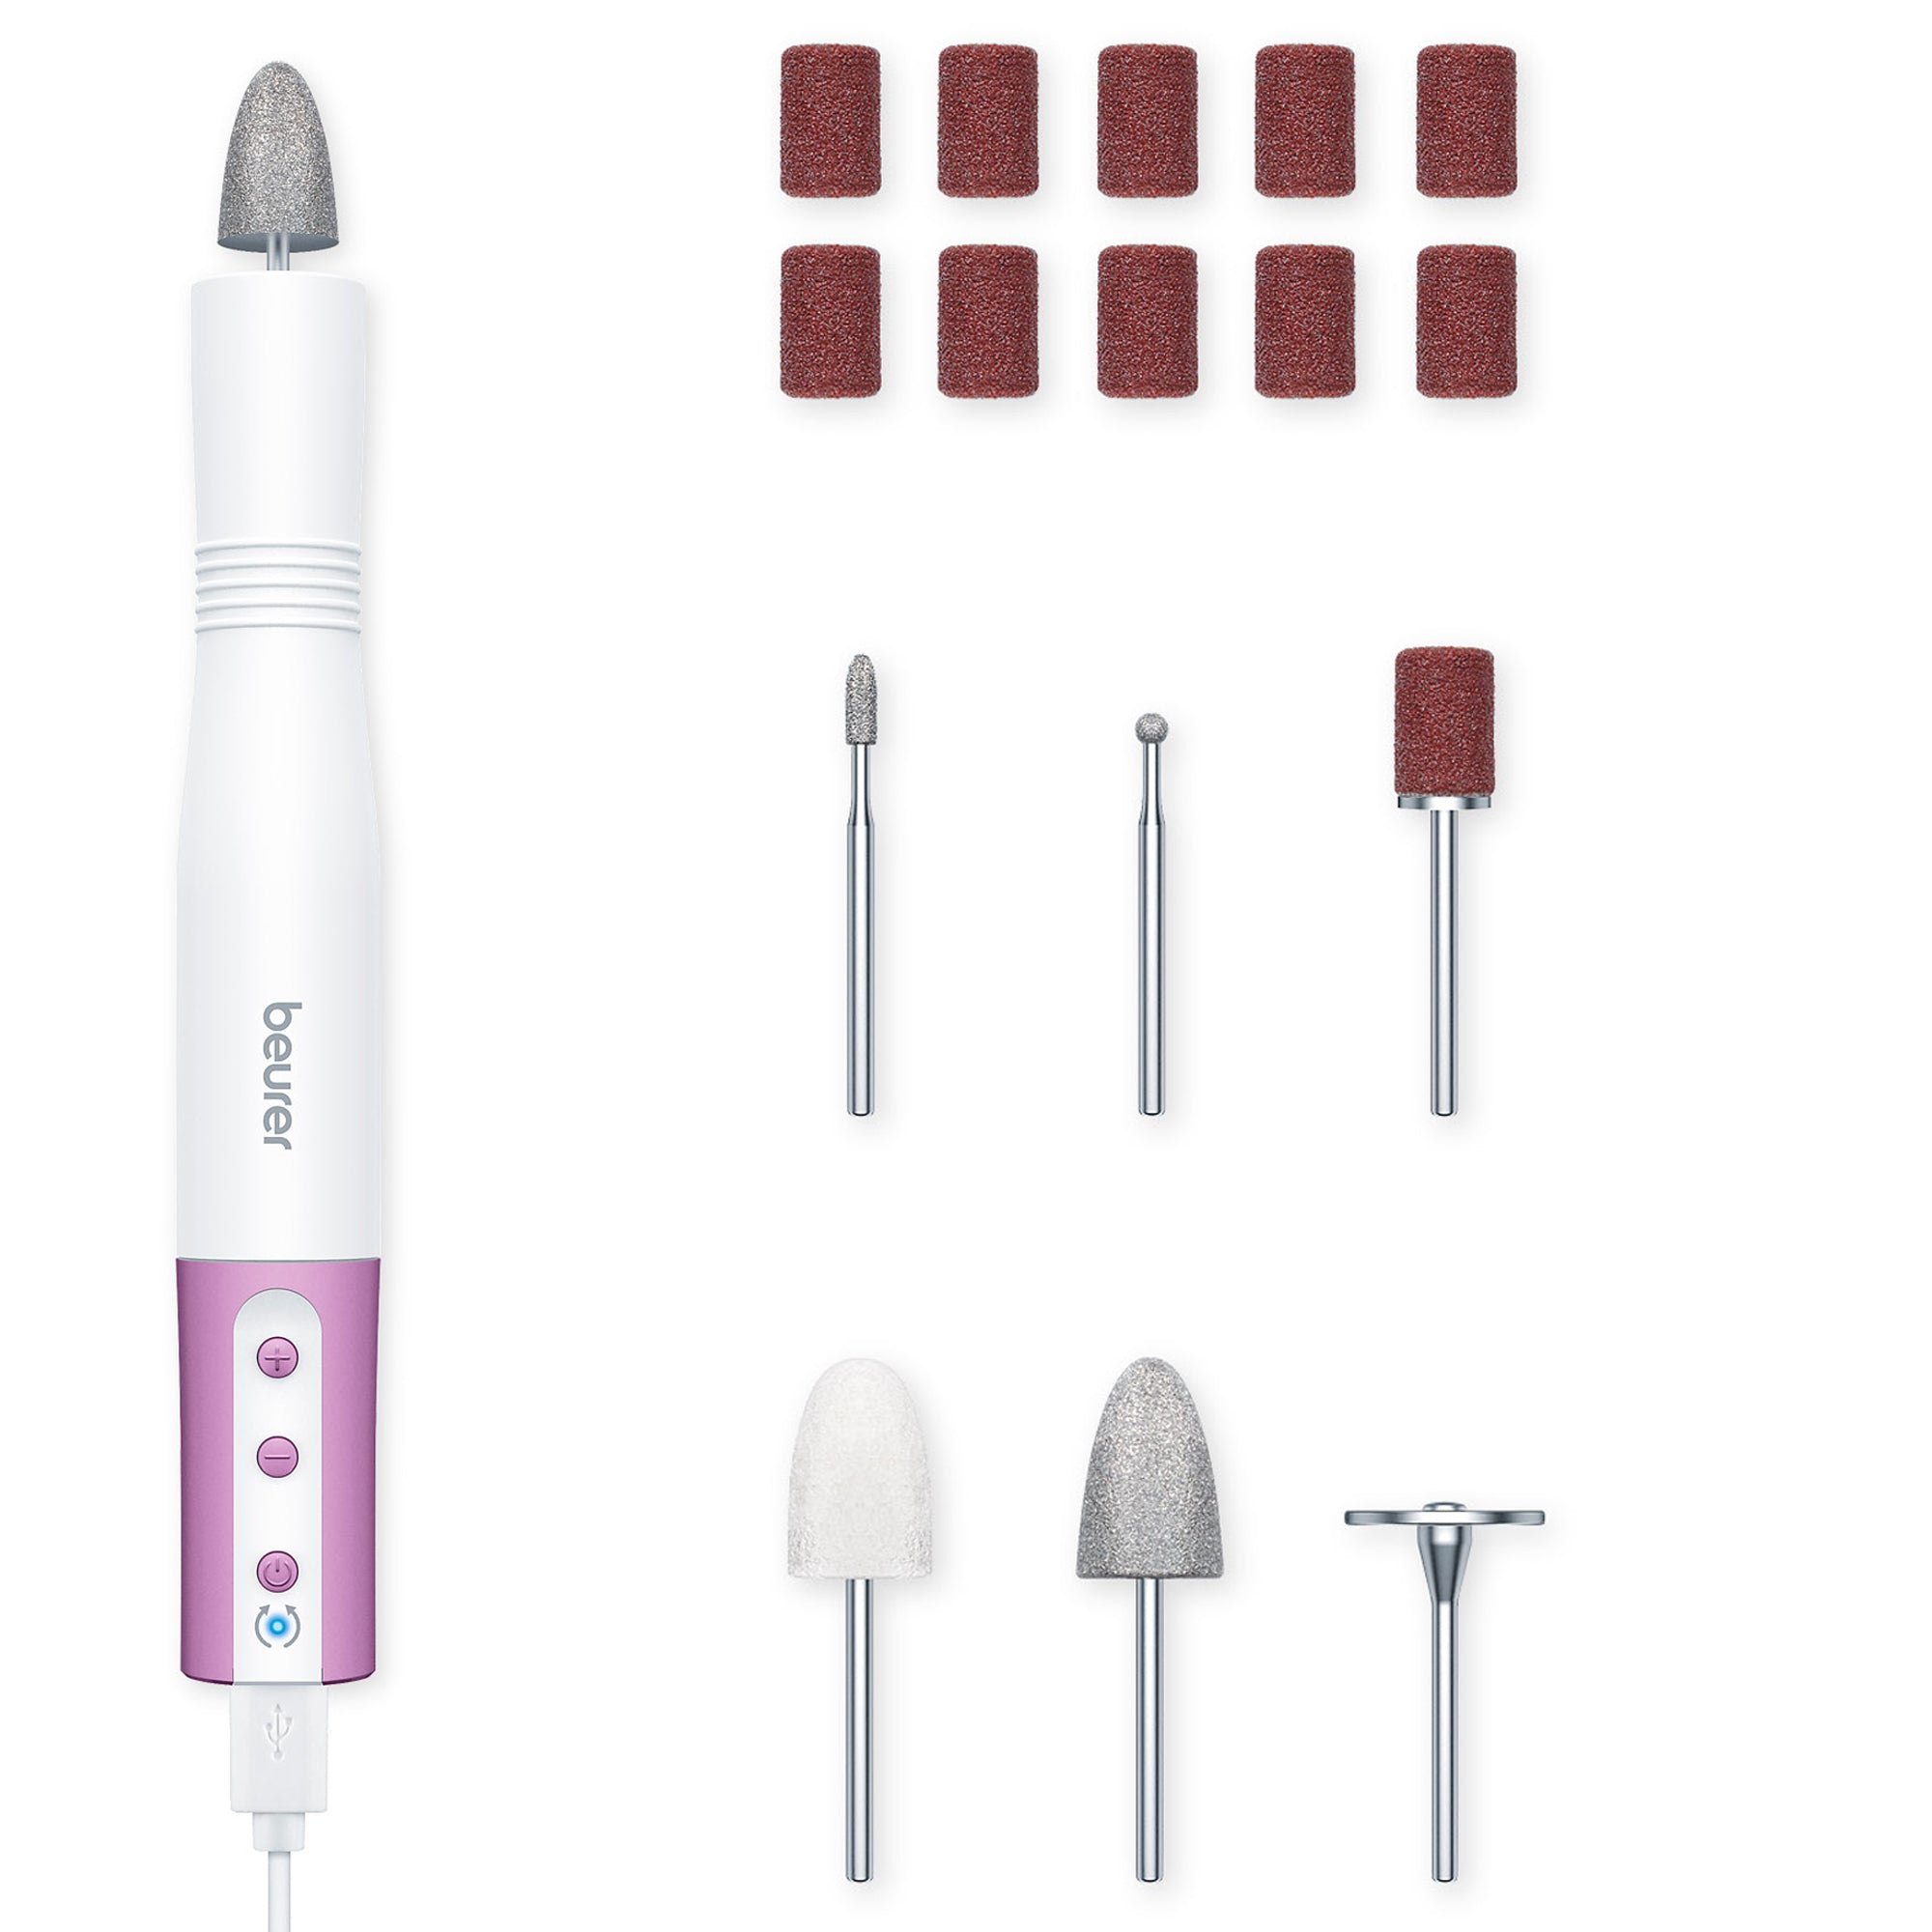 – MP52 Beurer Kit, & North Drill Manicure Pedicure America Travel Professional Nail 17-piece